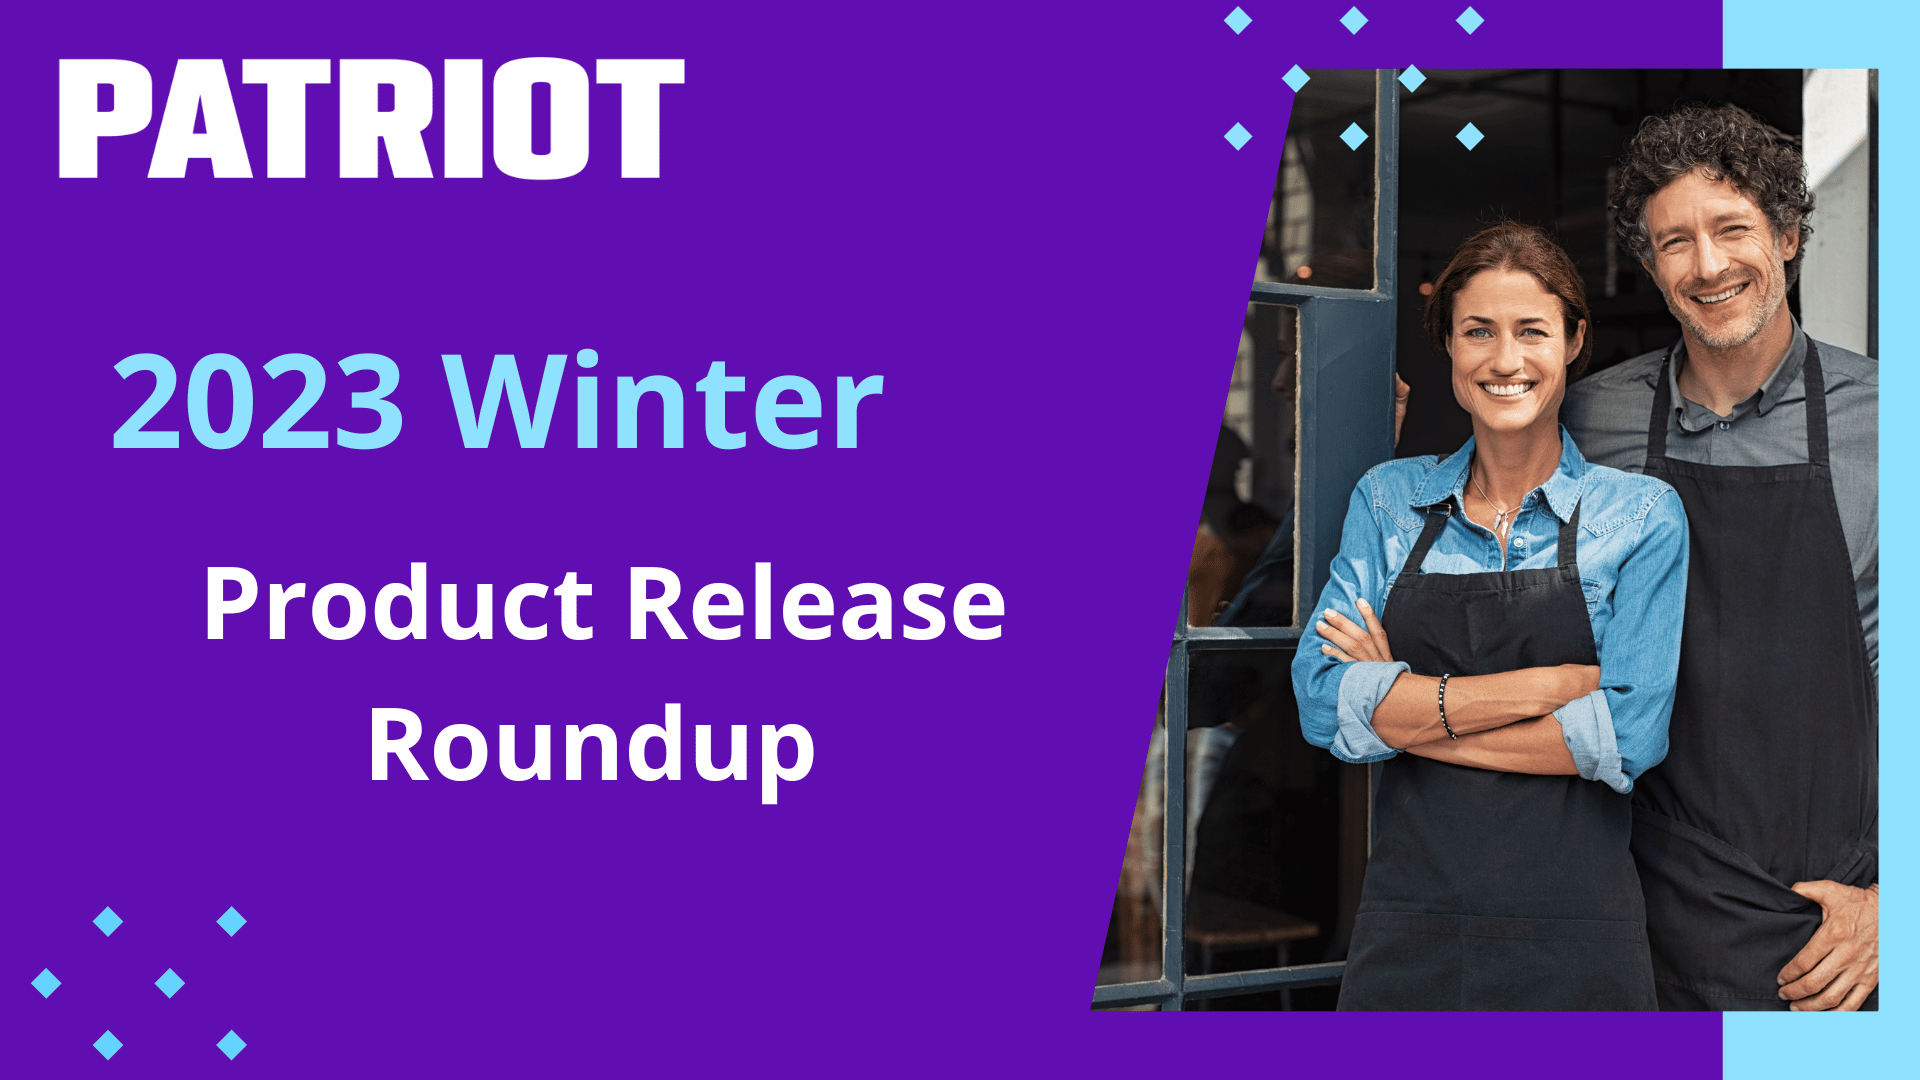 winter feature product release roundup announced with two business owners